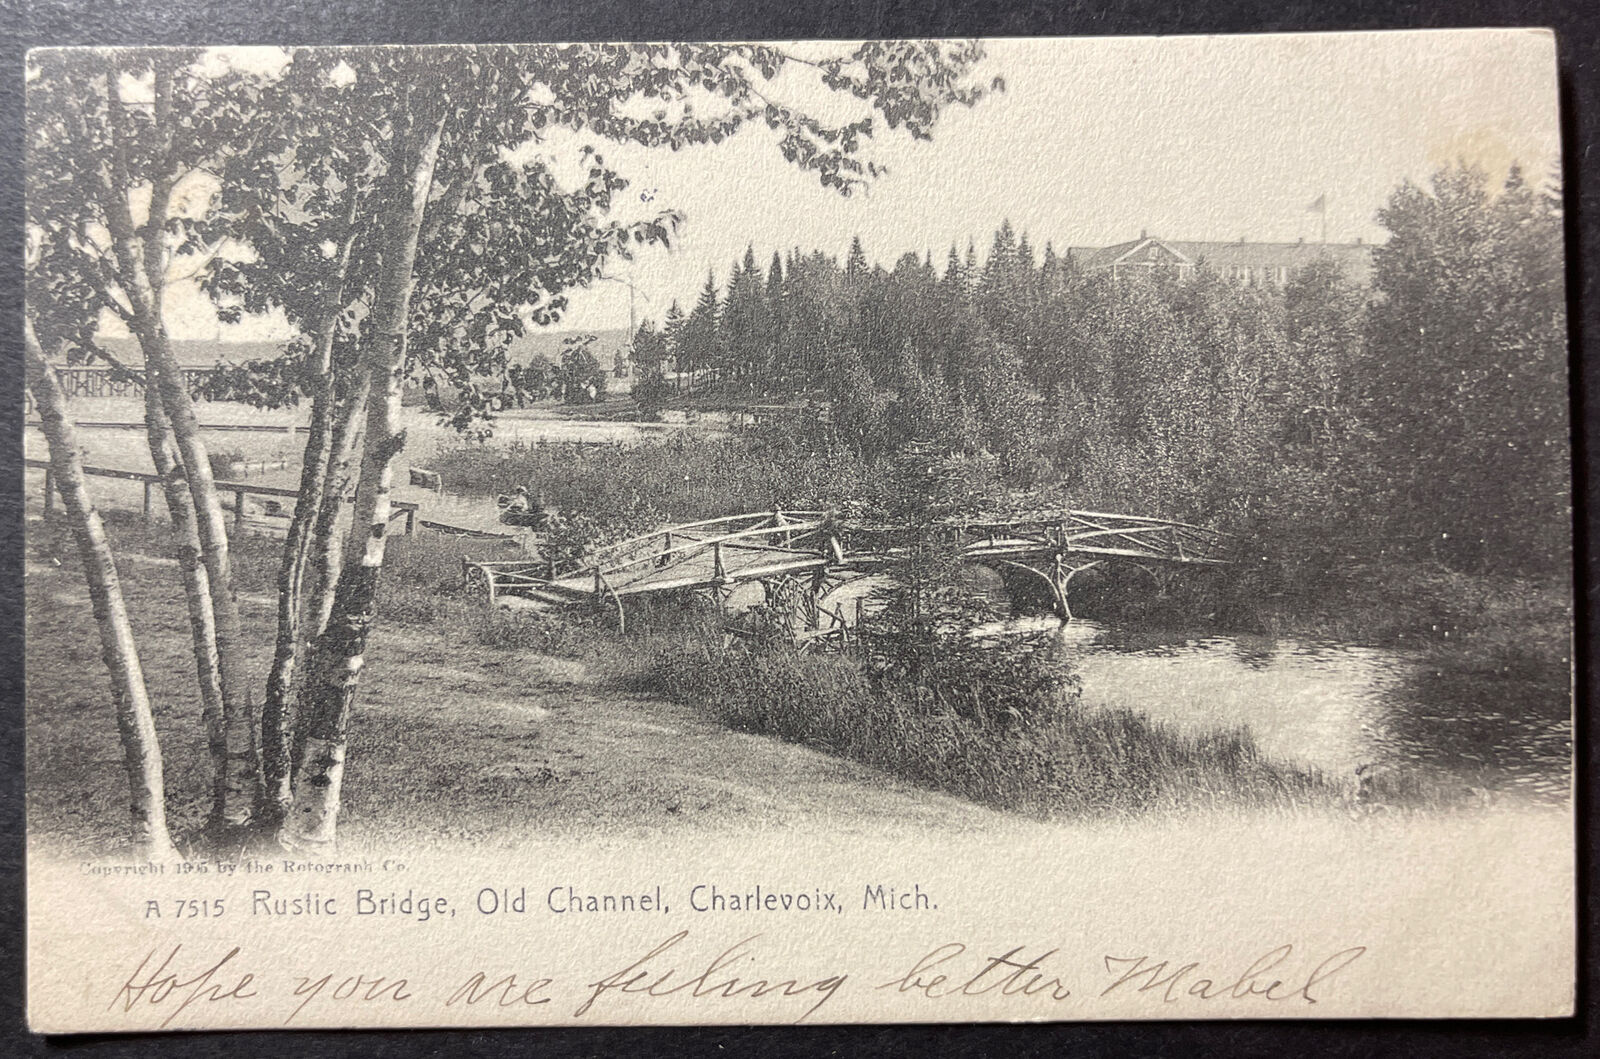 Rustic Bridge Old Channel Charlevoix Michigan printed 1907 The Rotograph Co 1905